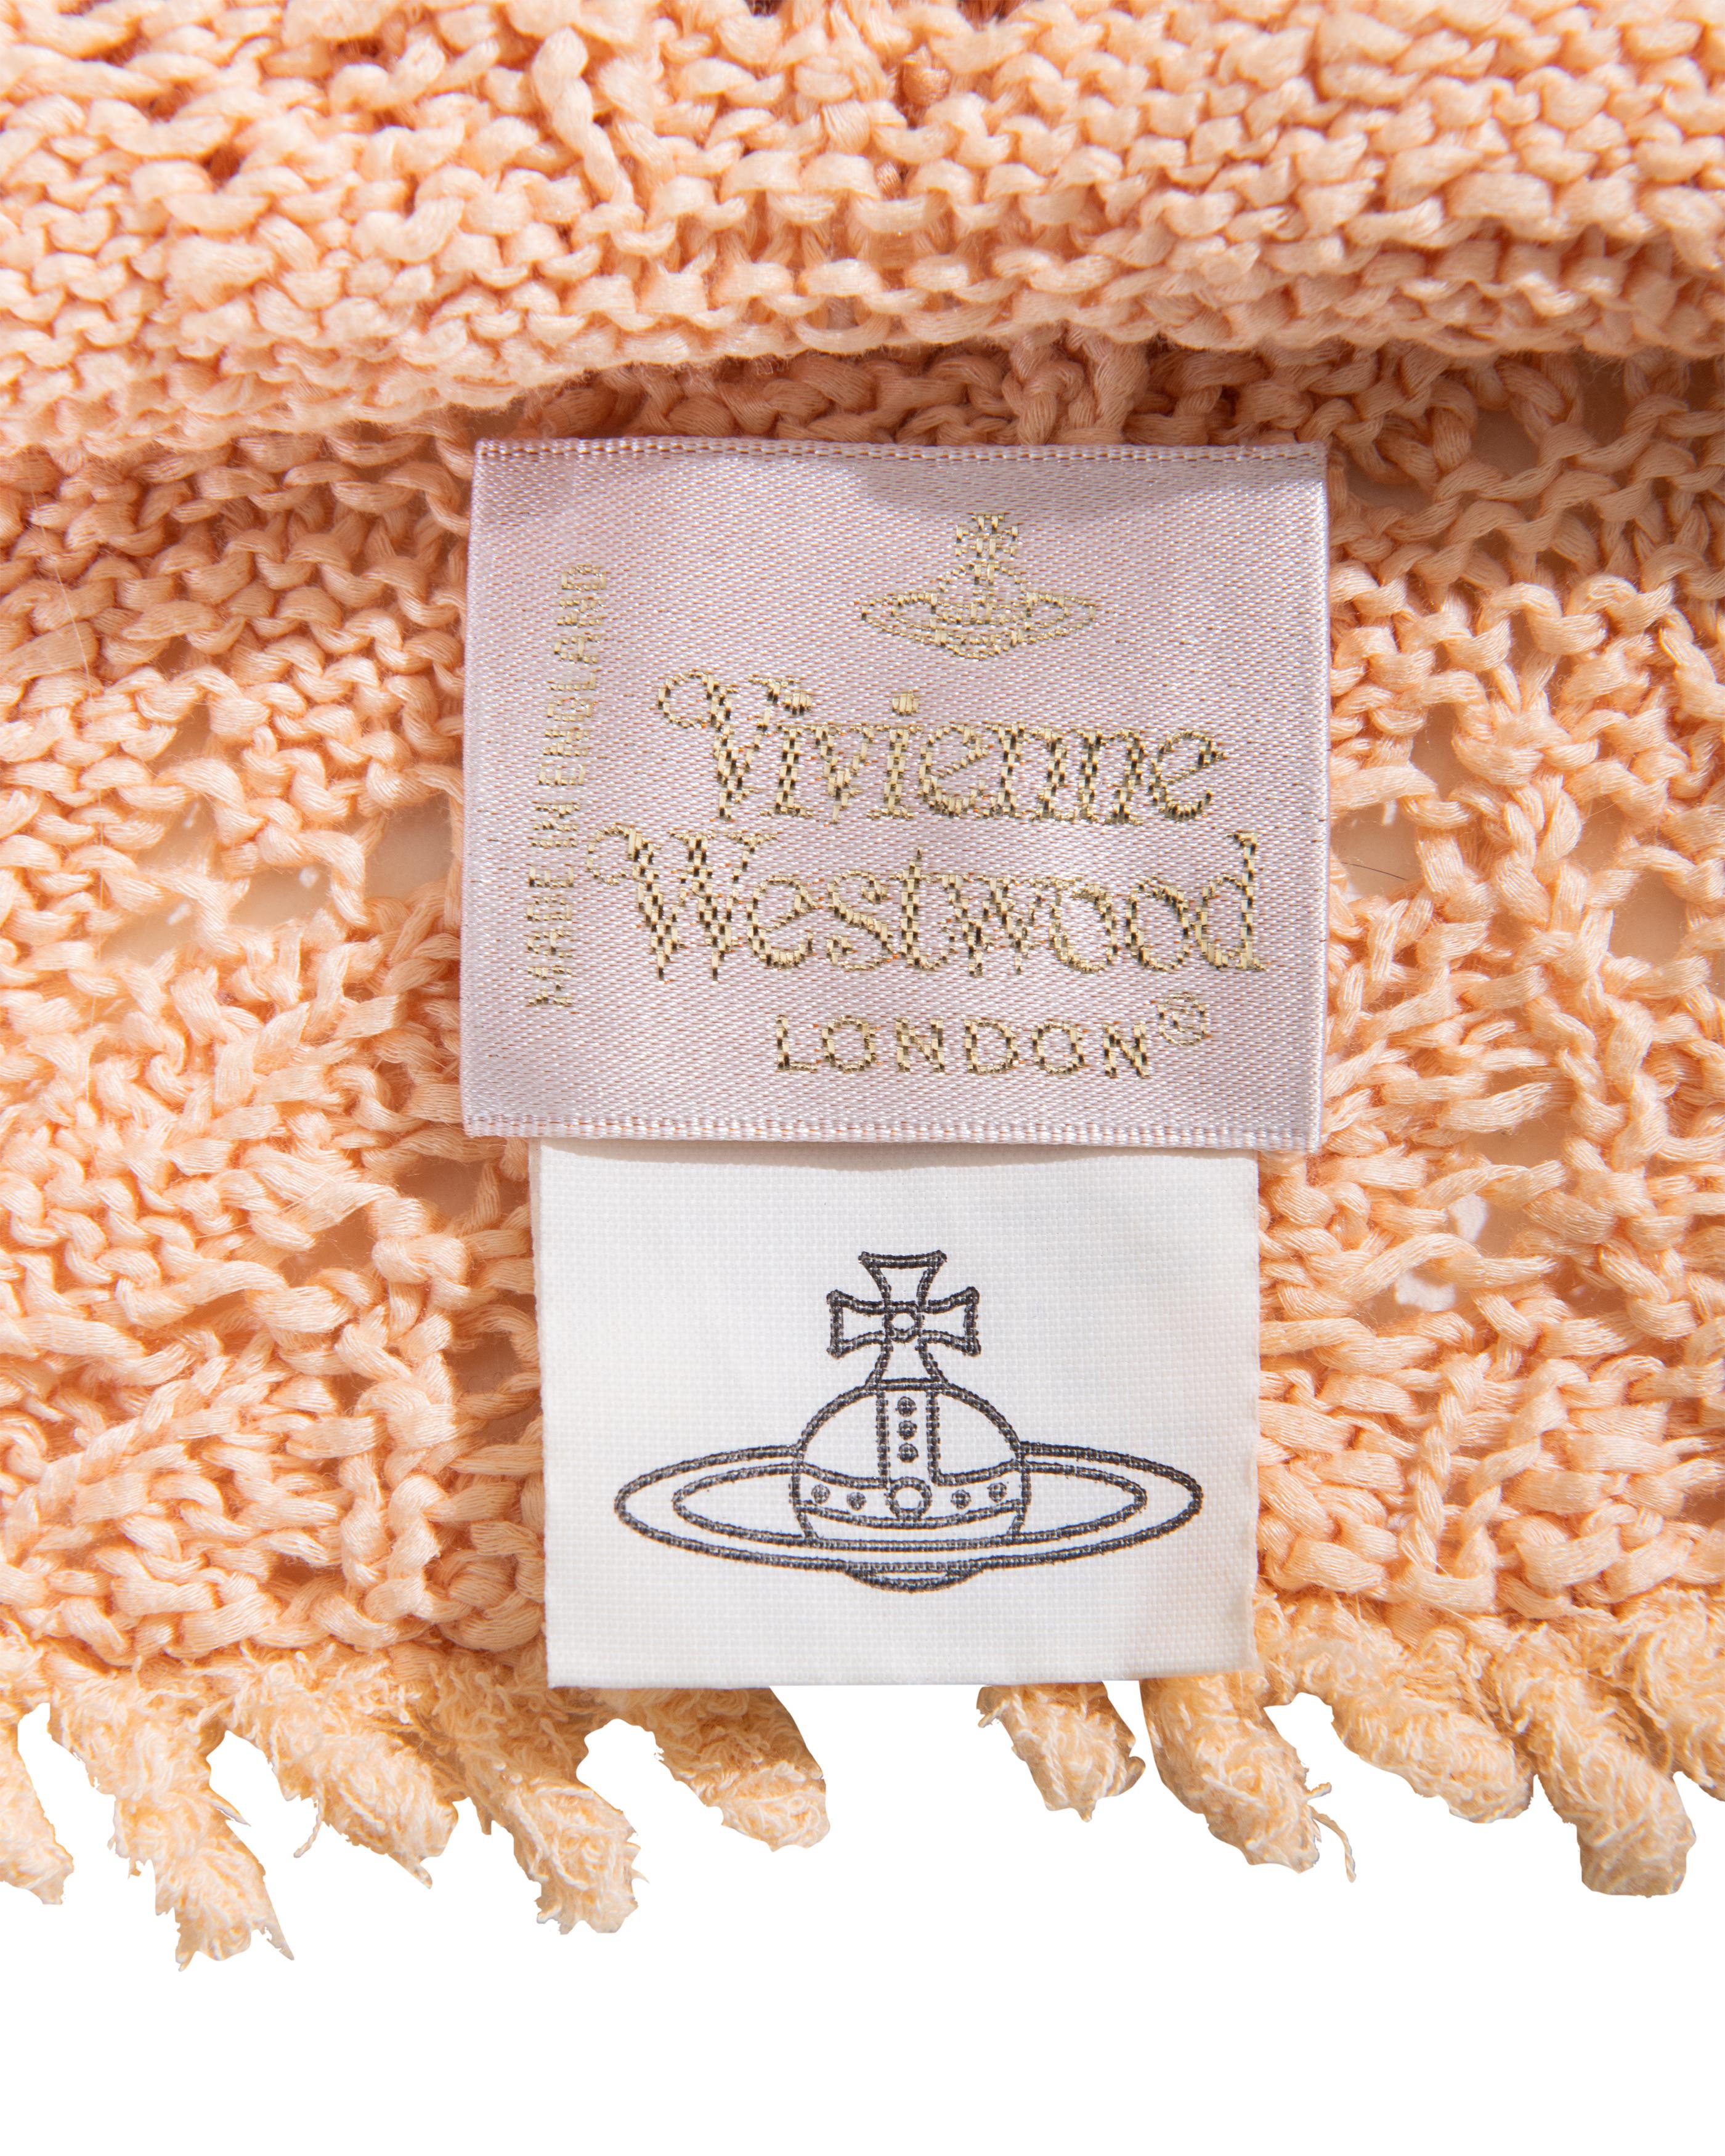 A/W 1994 Vivienne Westwood Peach Knit Top and Hat Set For Sale 16